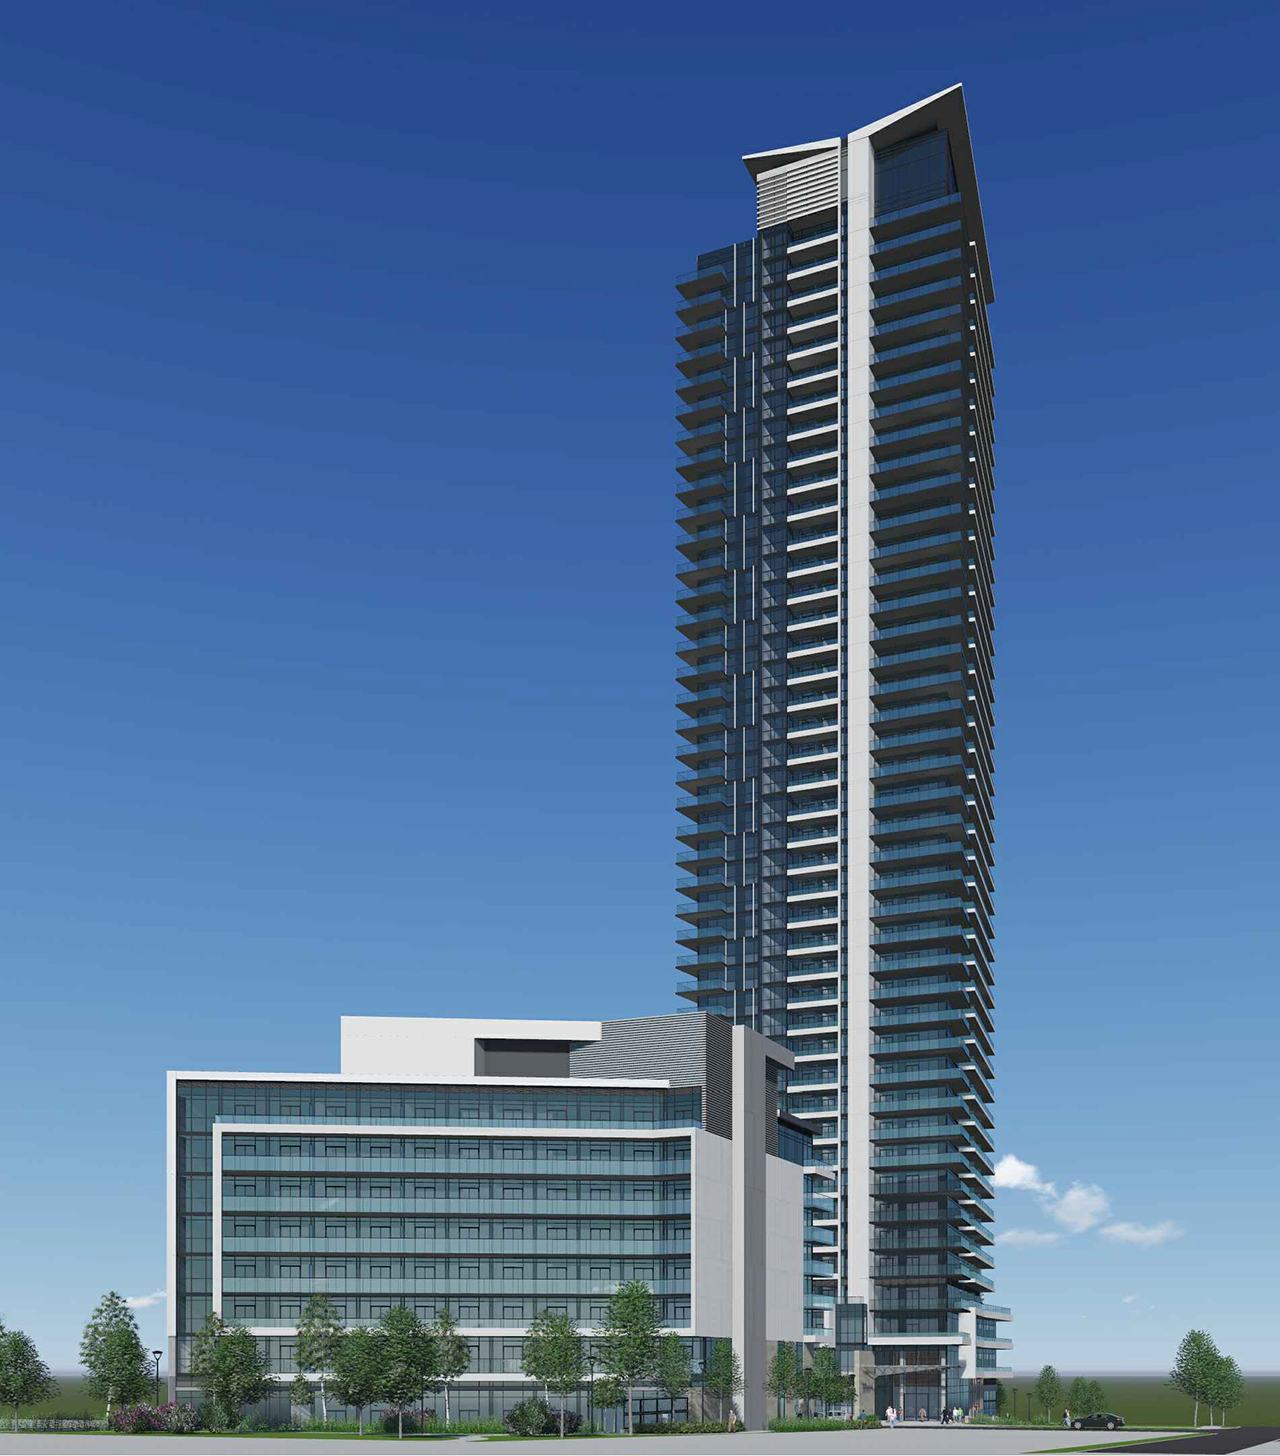 2173 Lake Shore West, Toronto, designed by Richmond Architects for the Conservatory Group